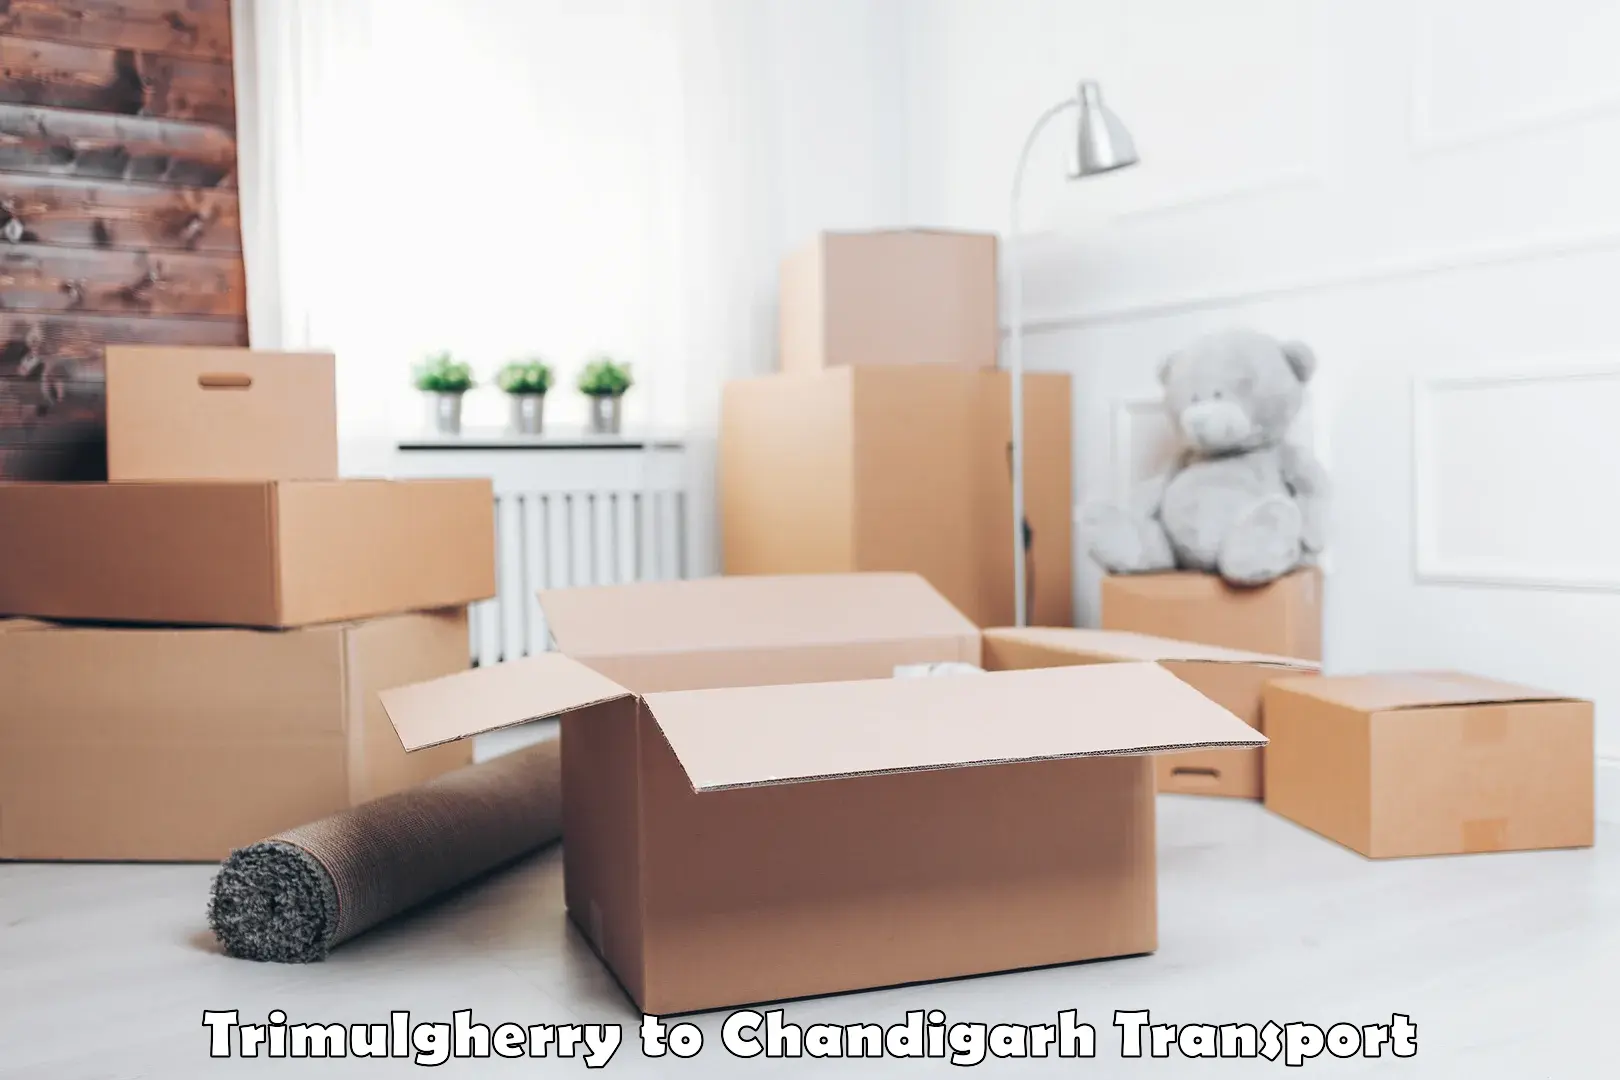 Bike shipping service Trimulgherry to Chandigarh